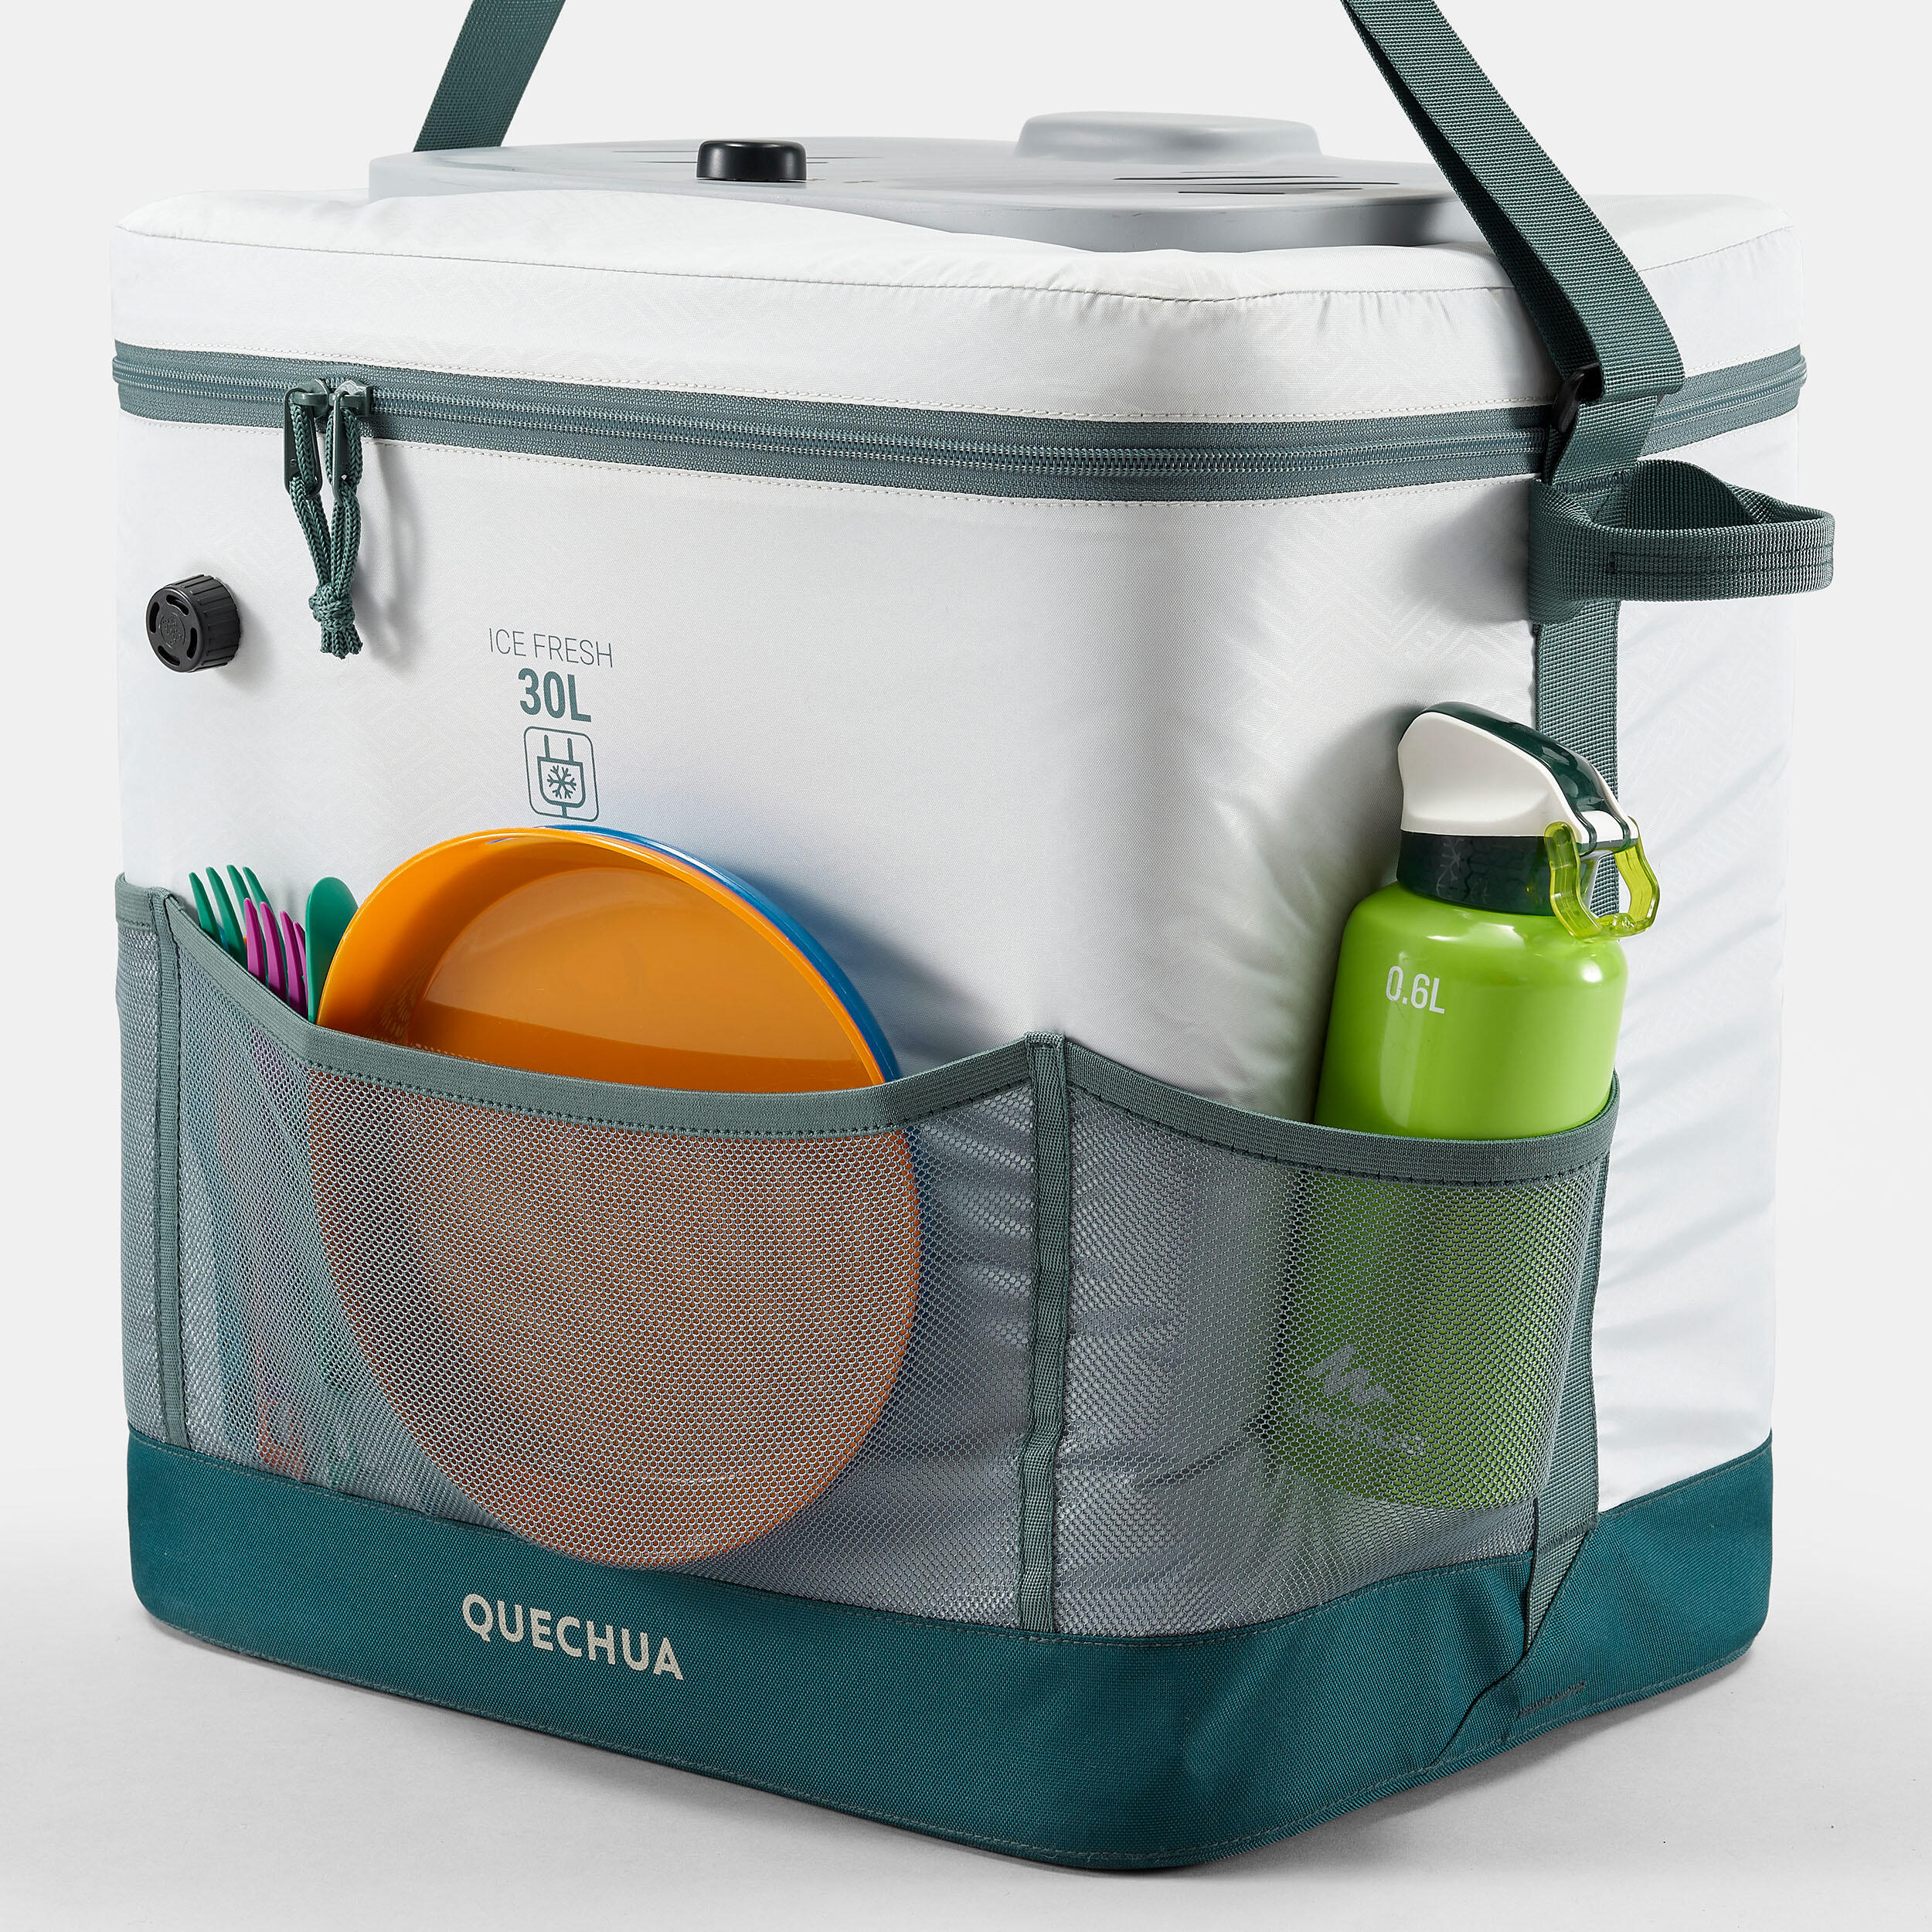 CAMPING FLEXIBLE ELECTRIC COOLER - 30 L - PRESERVES COLD FOR 96 HOURS 9/13